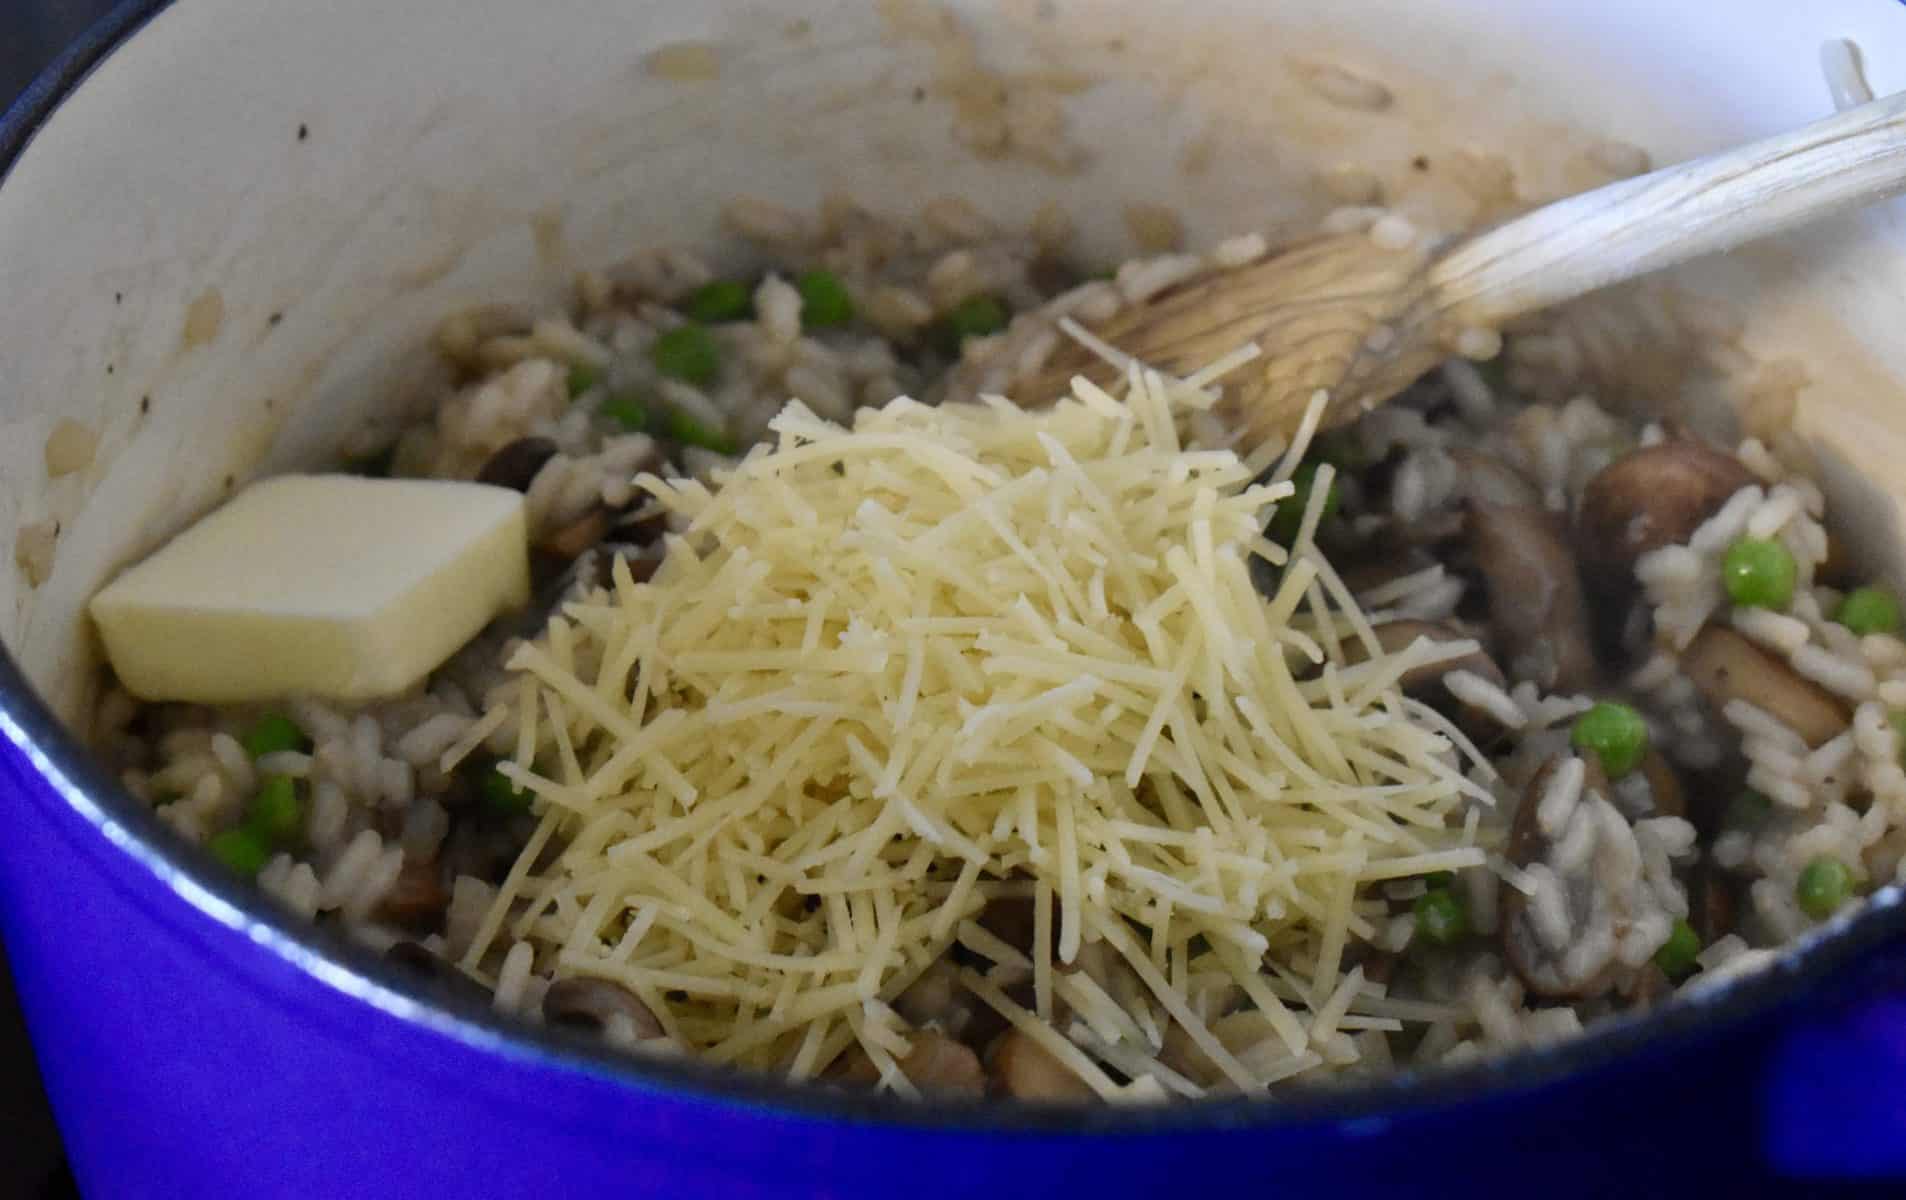 butter and parmesan cheese on the mushroom pea risotto in the pot.